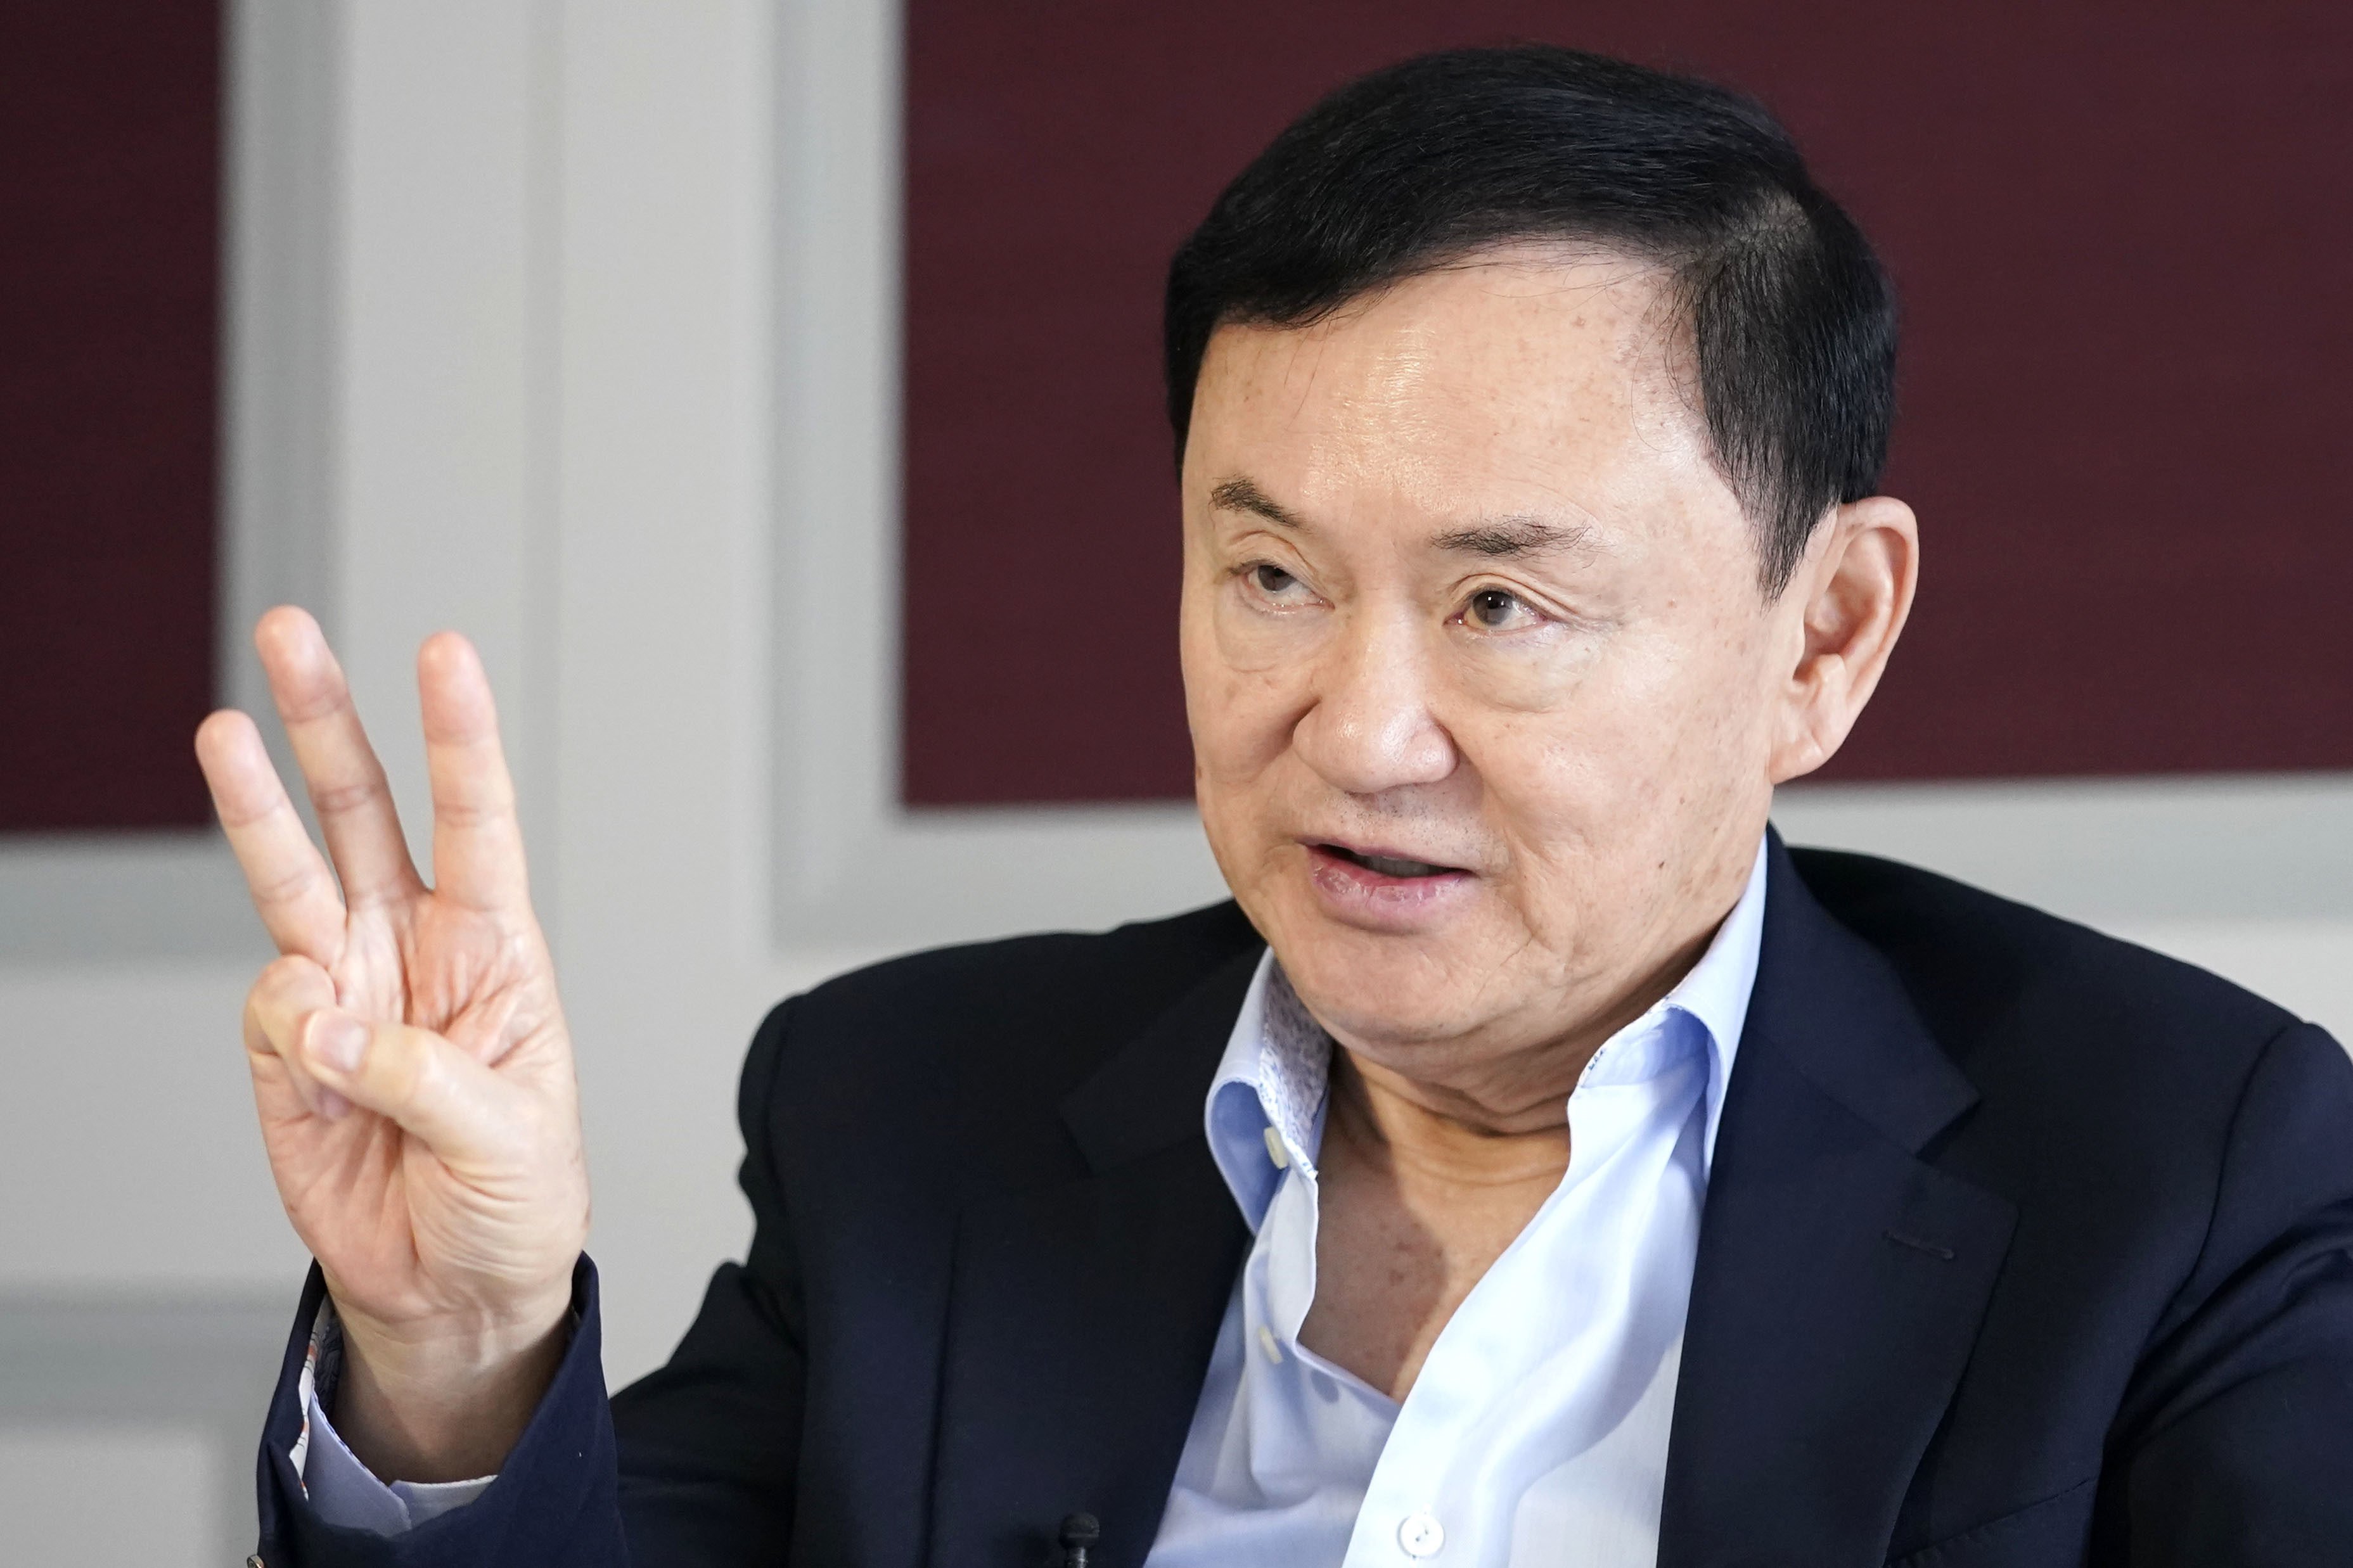 Former Thai Prime Minister Thaksin Shinawatra says he wants to return home after years in self-exile. Photo: Kyodo